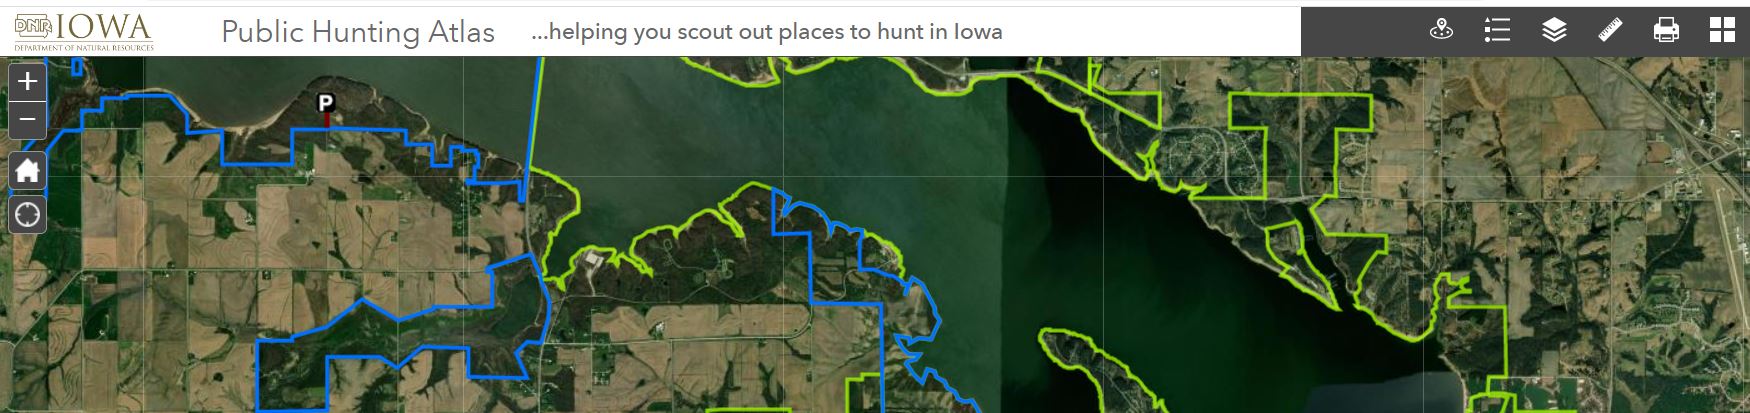 Screen capture of the hunting atlas showing example of area boundaries